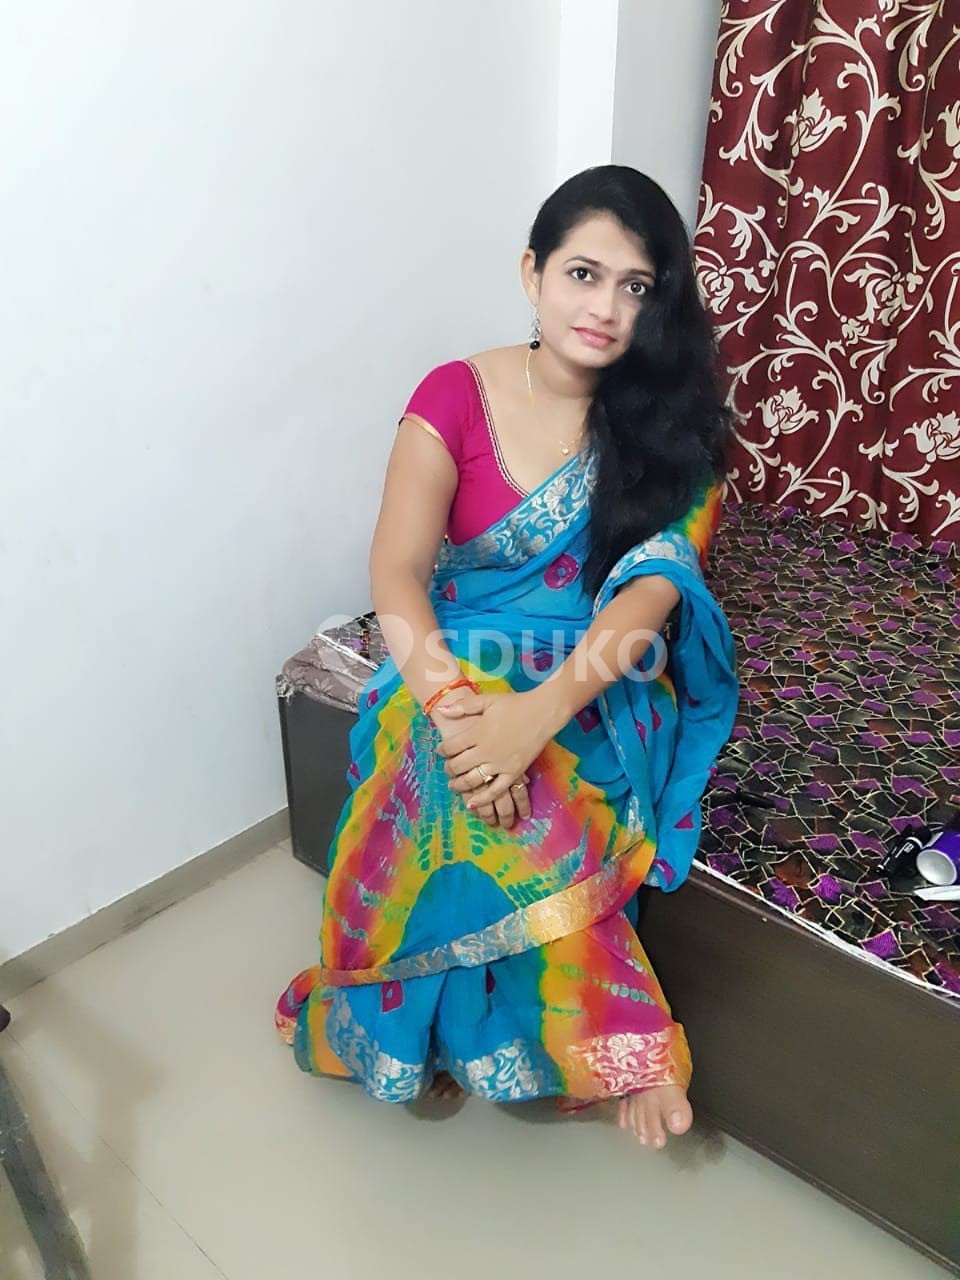 Bijapur myself Mallika 💯% satisfied call girl service full safe and secure service ..24 /7 available